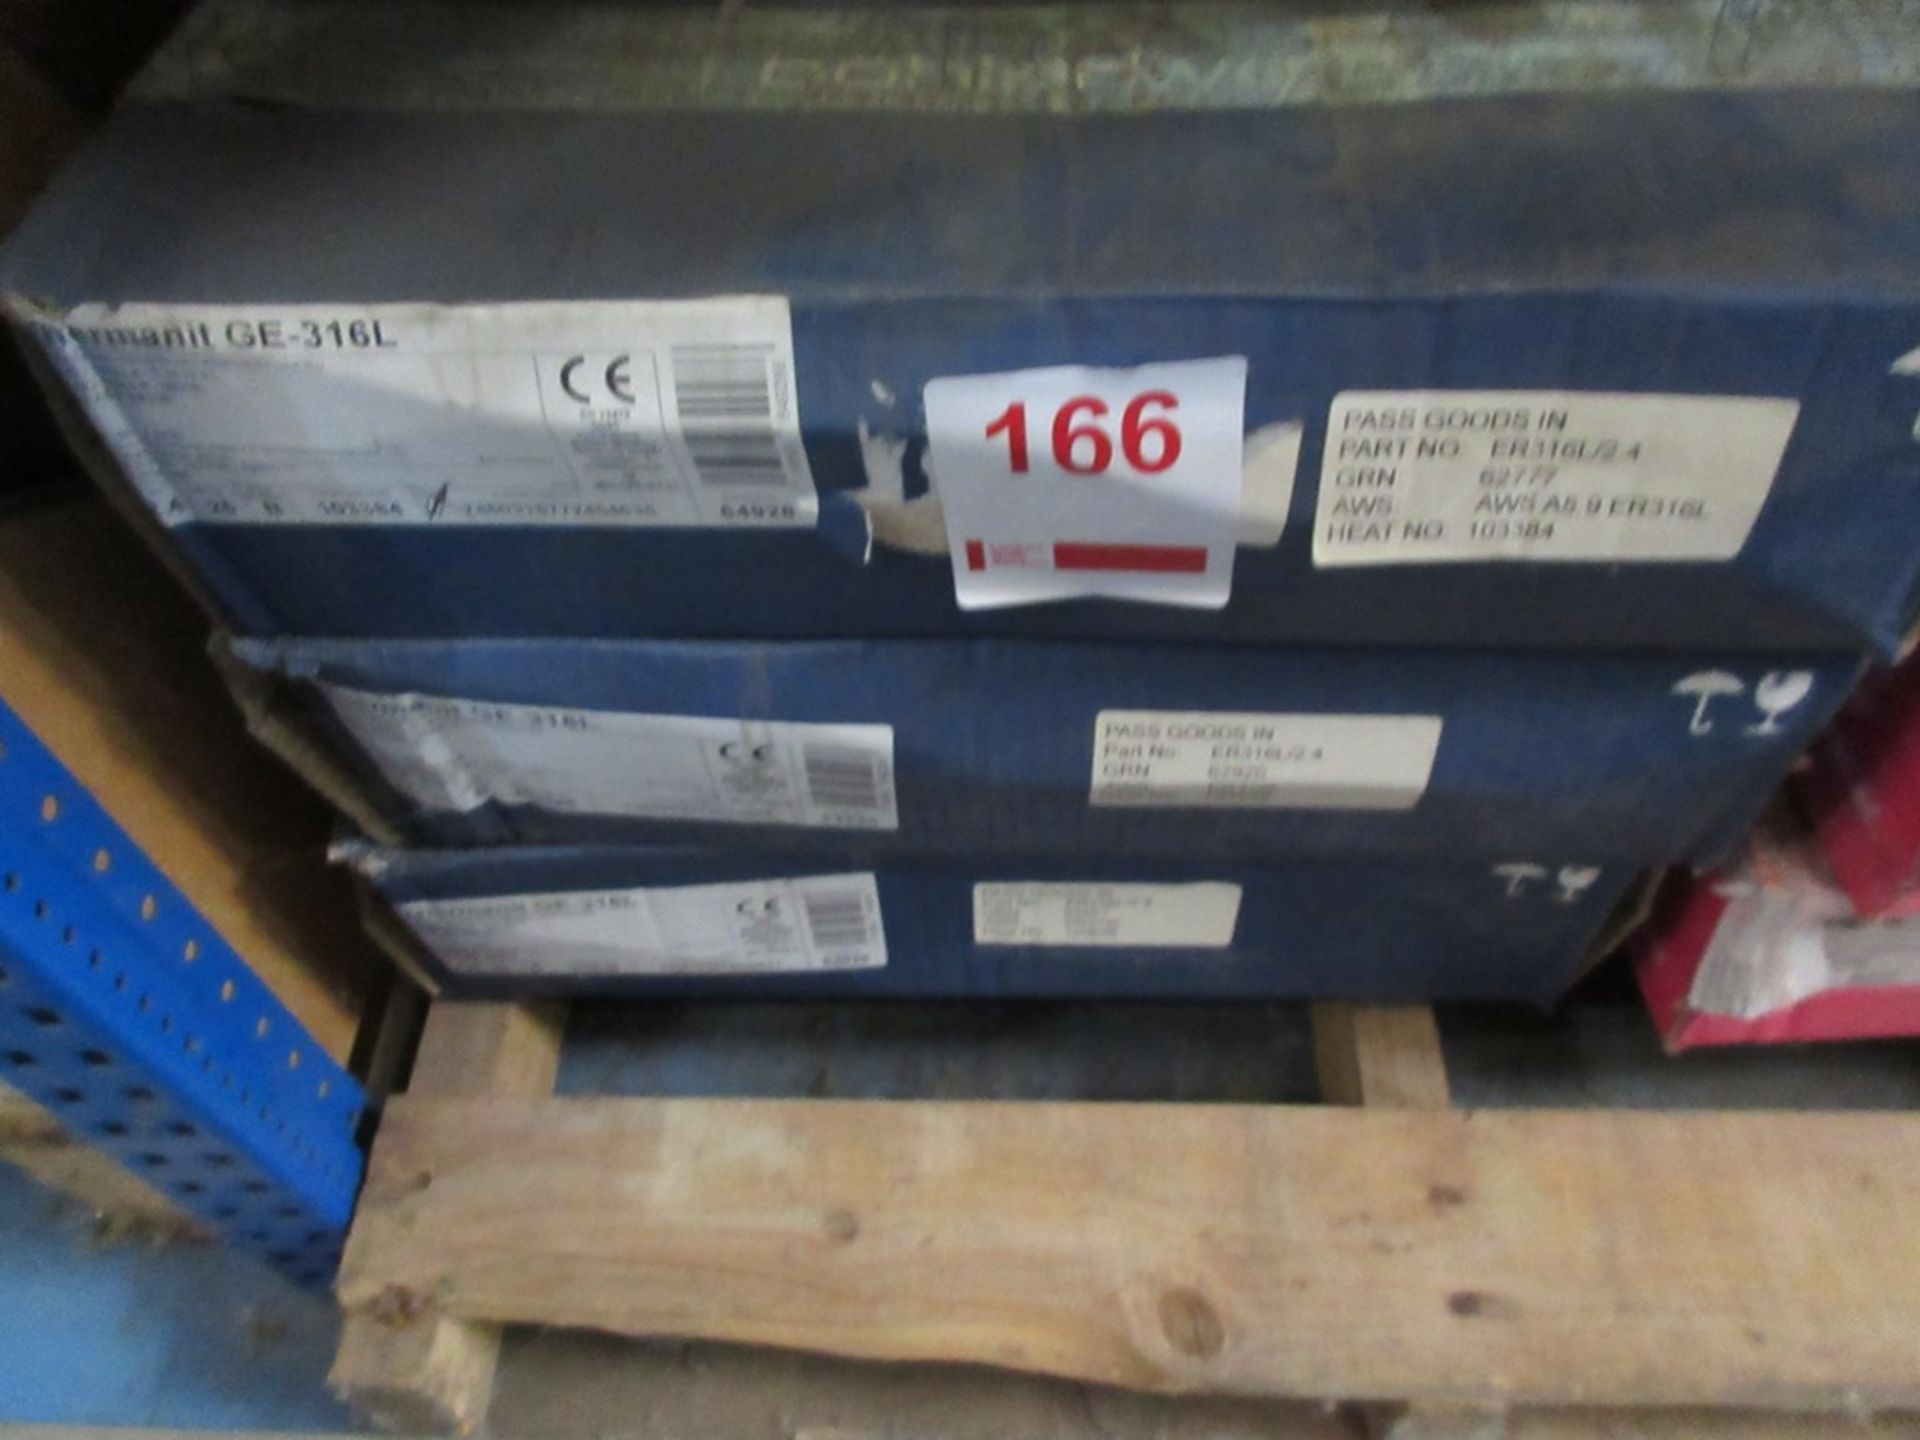 Three reels of Thermanit GE361L welding wire, part no. ER316L/2.4